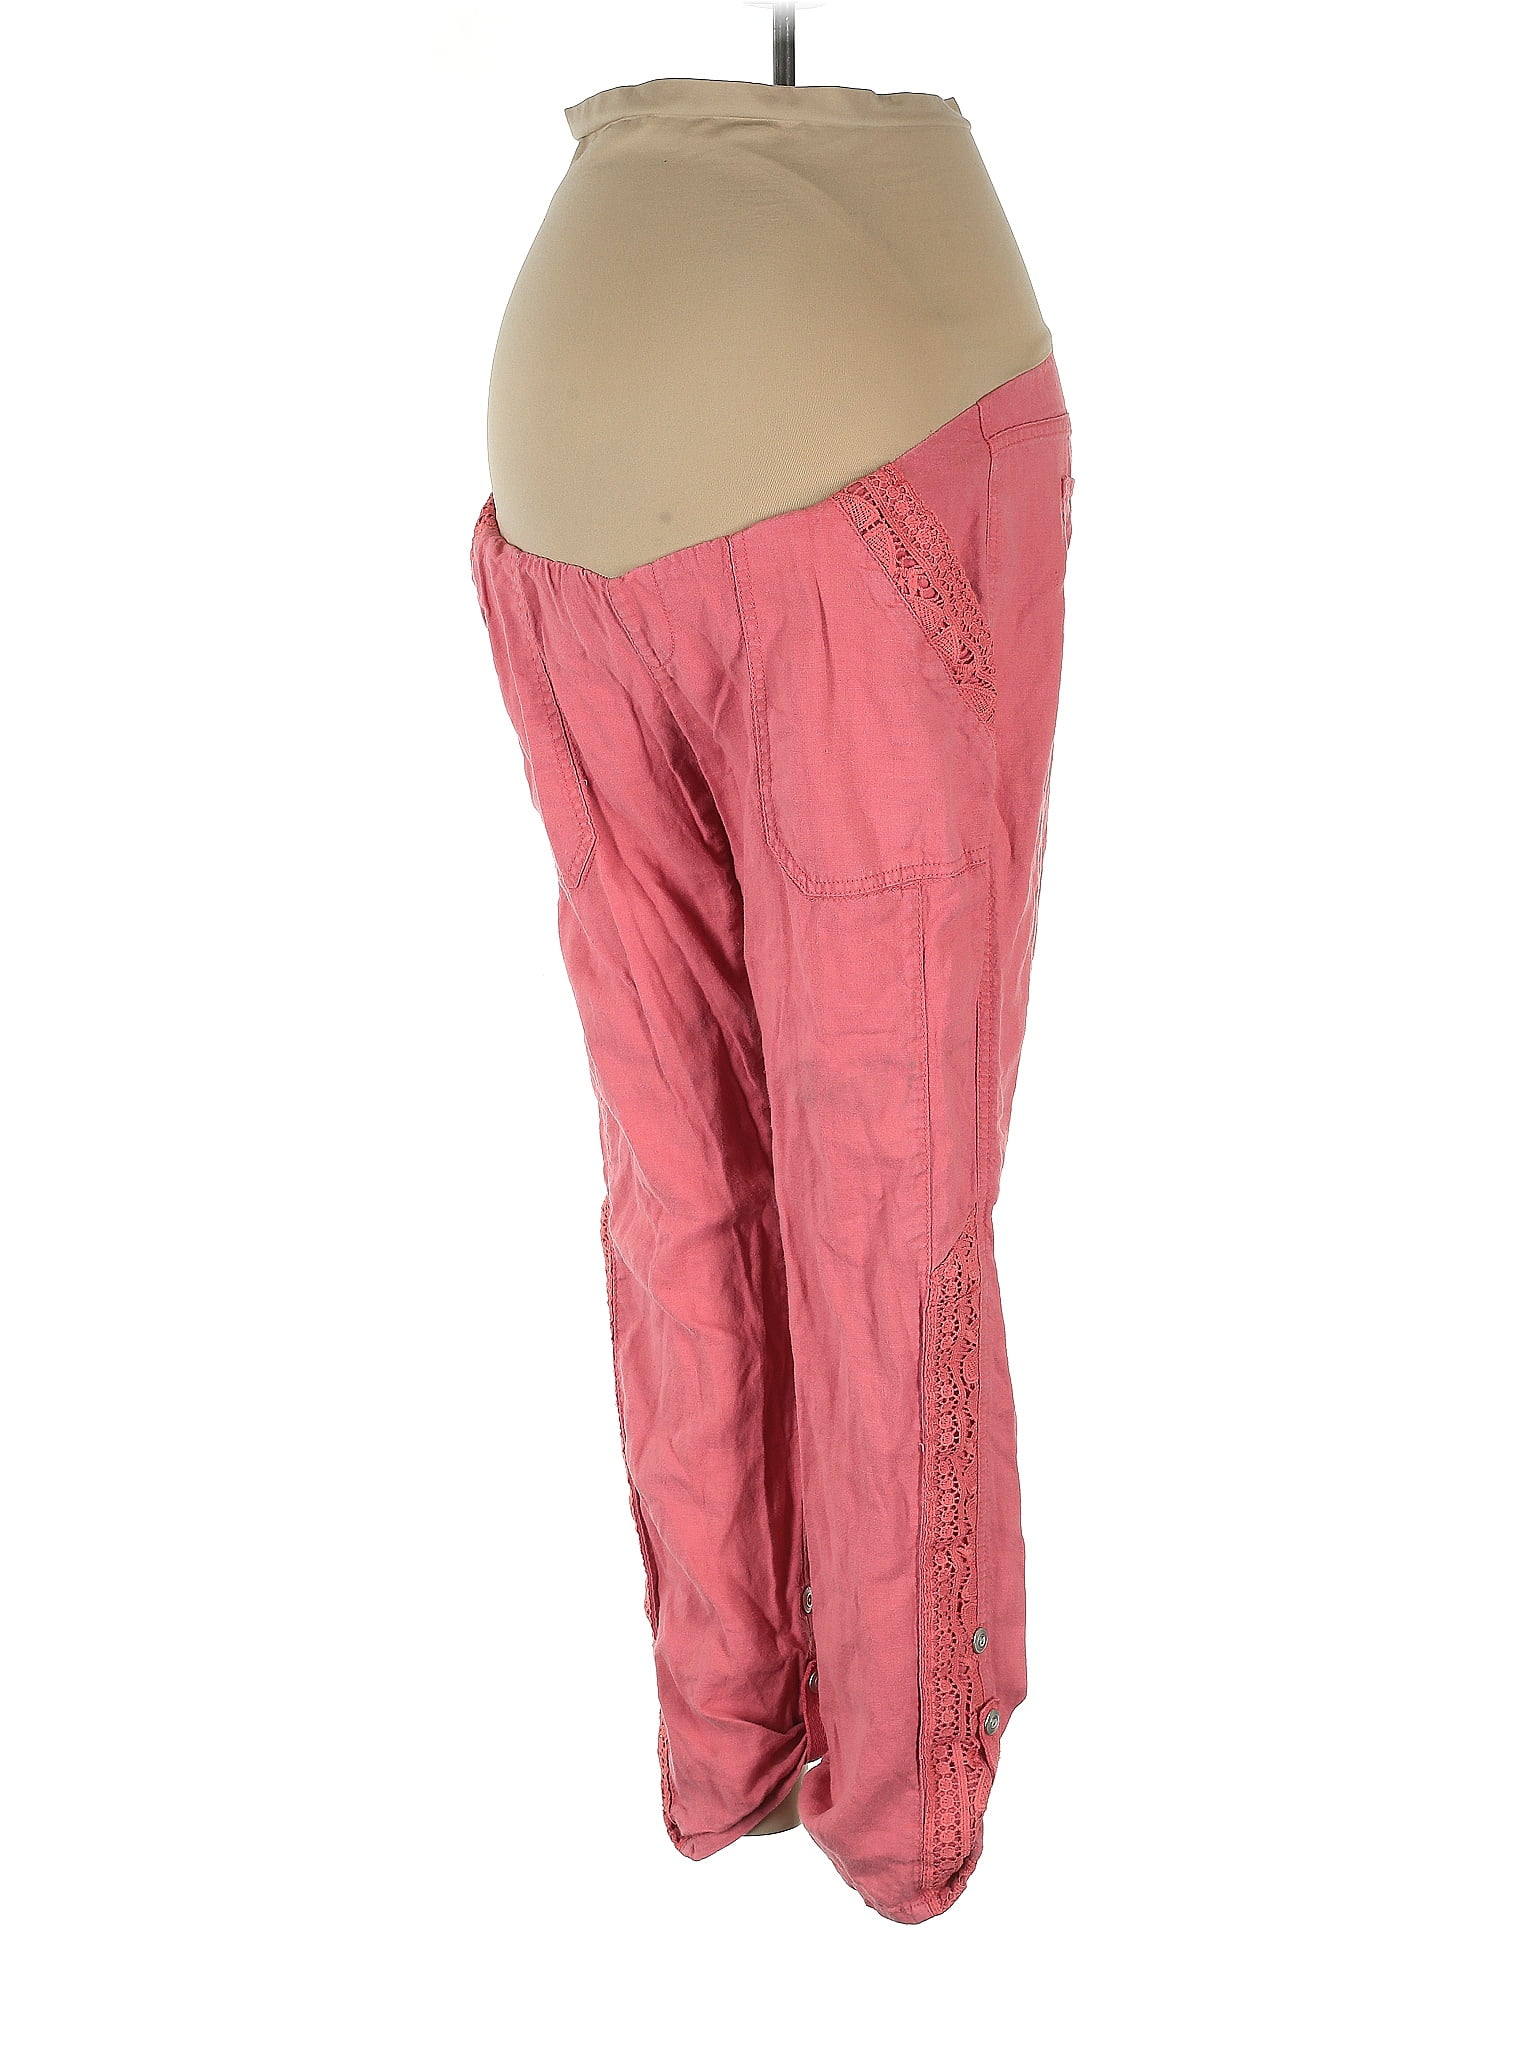 Nike Hot Pink Sweatpants Size L - $48 (26% Off Retail) - From Erin